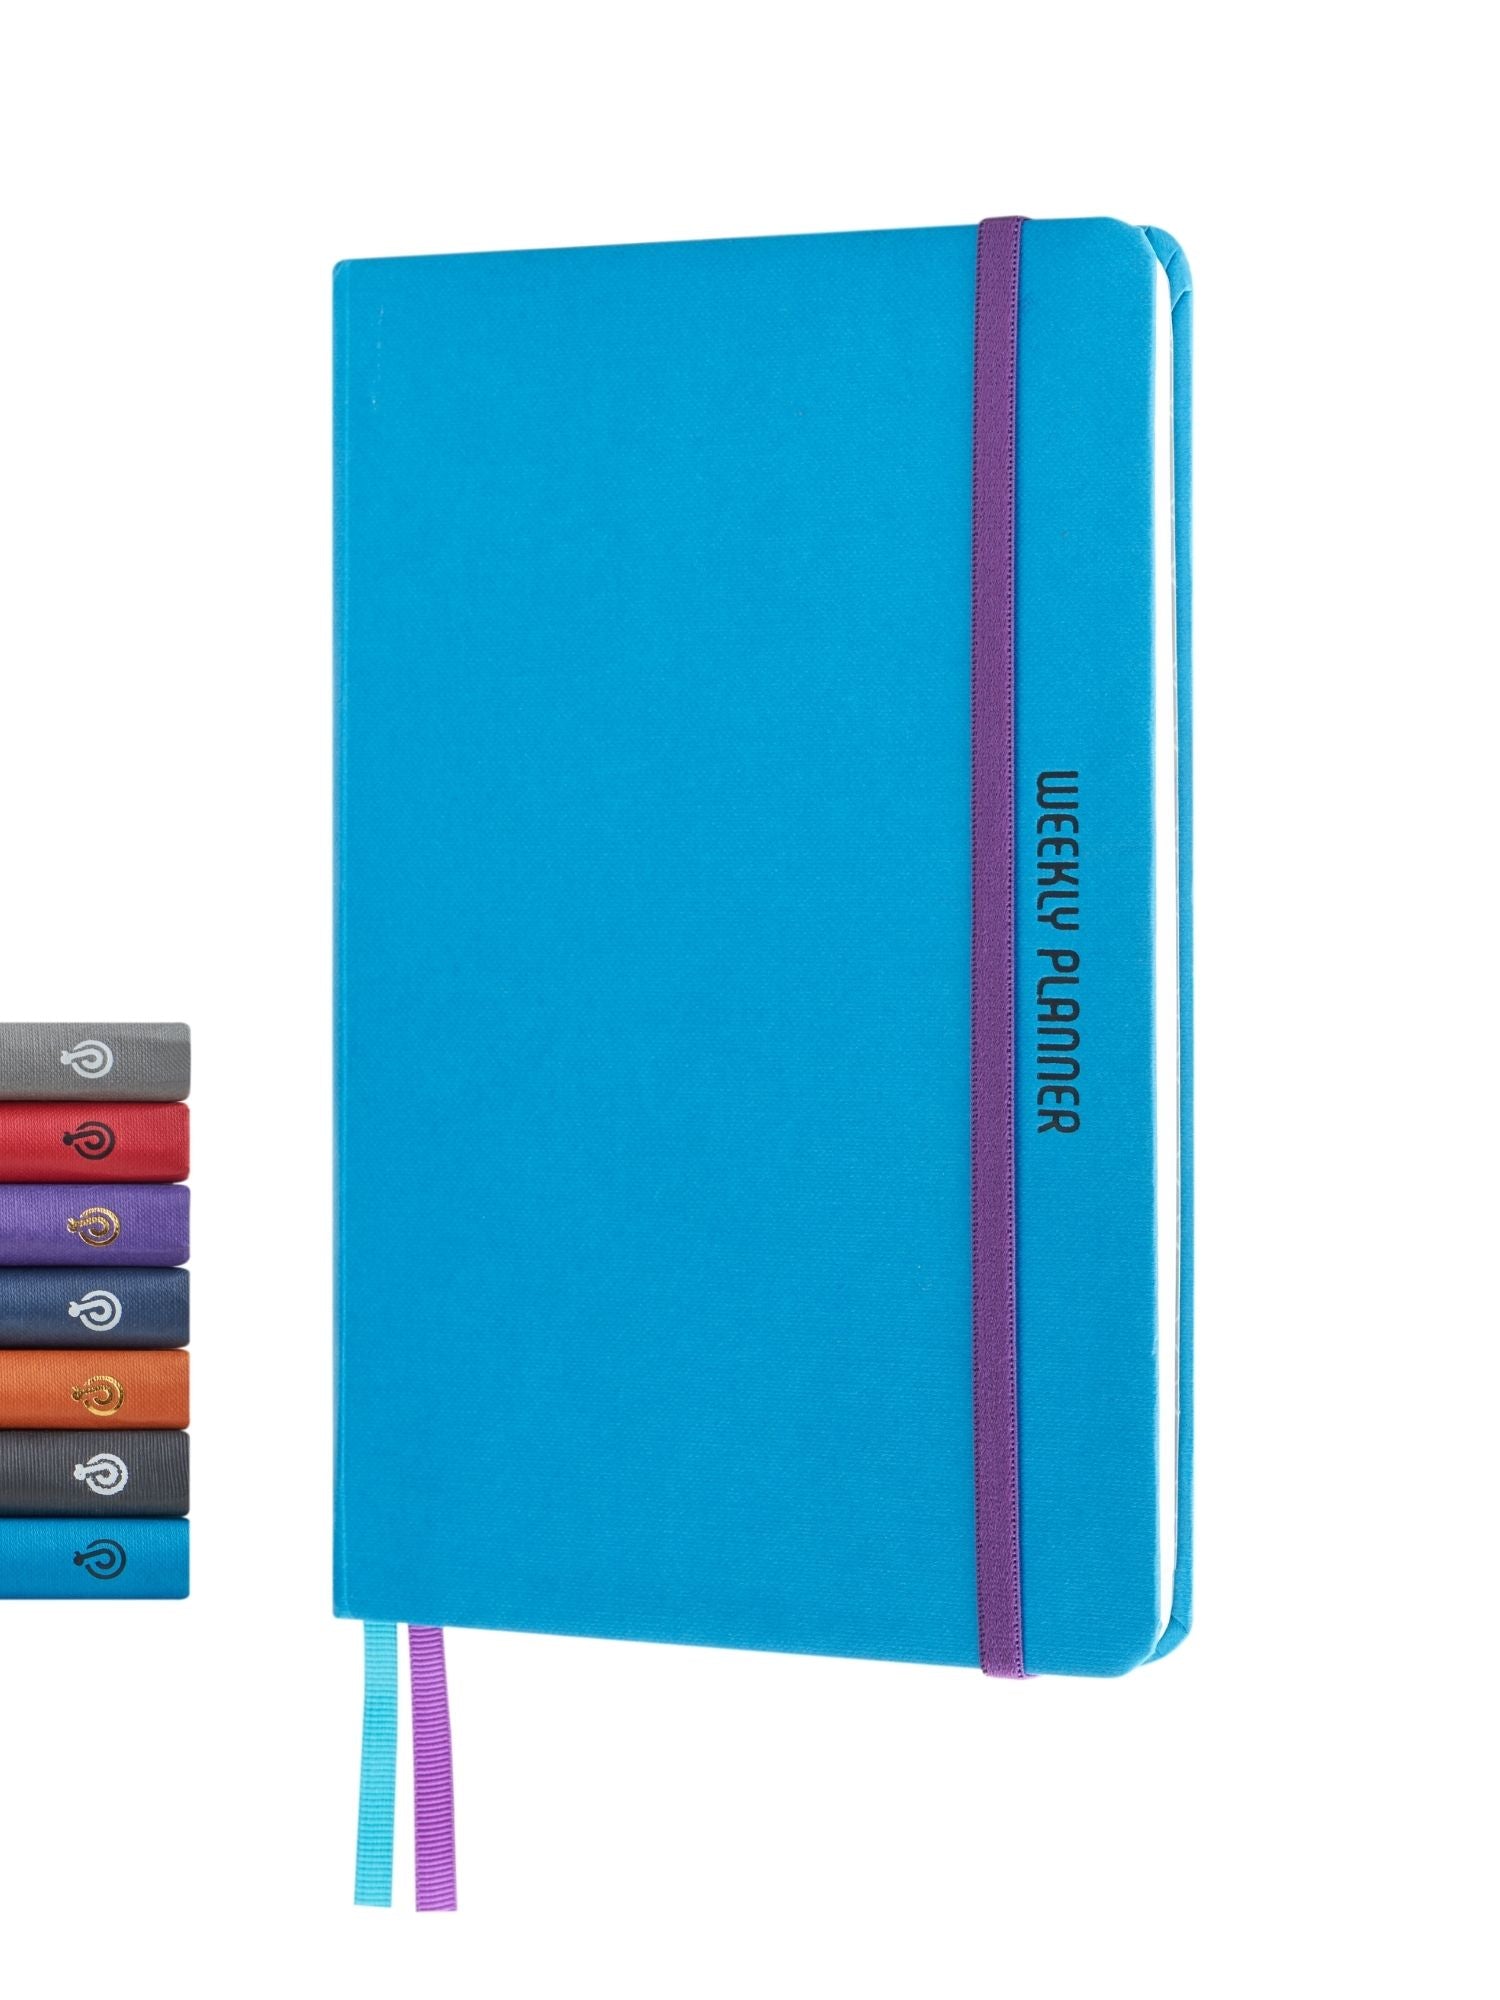 DOODLE Organise- It Hardbound A5 Weekly Planner - Turquoise